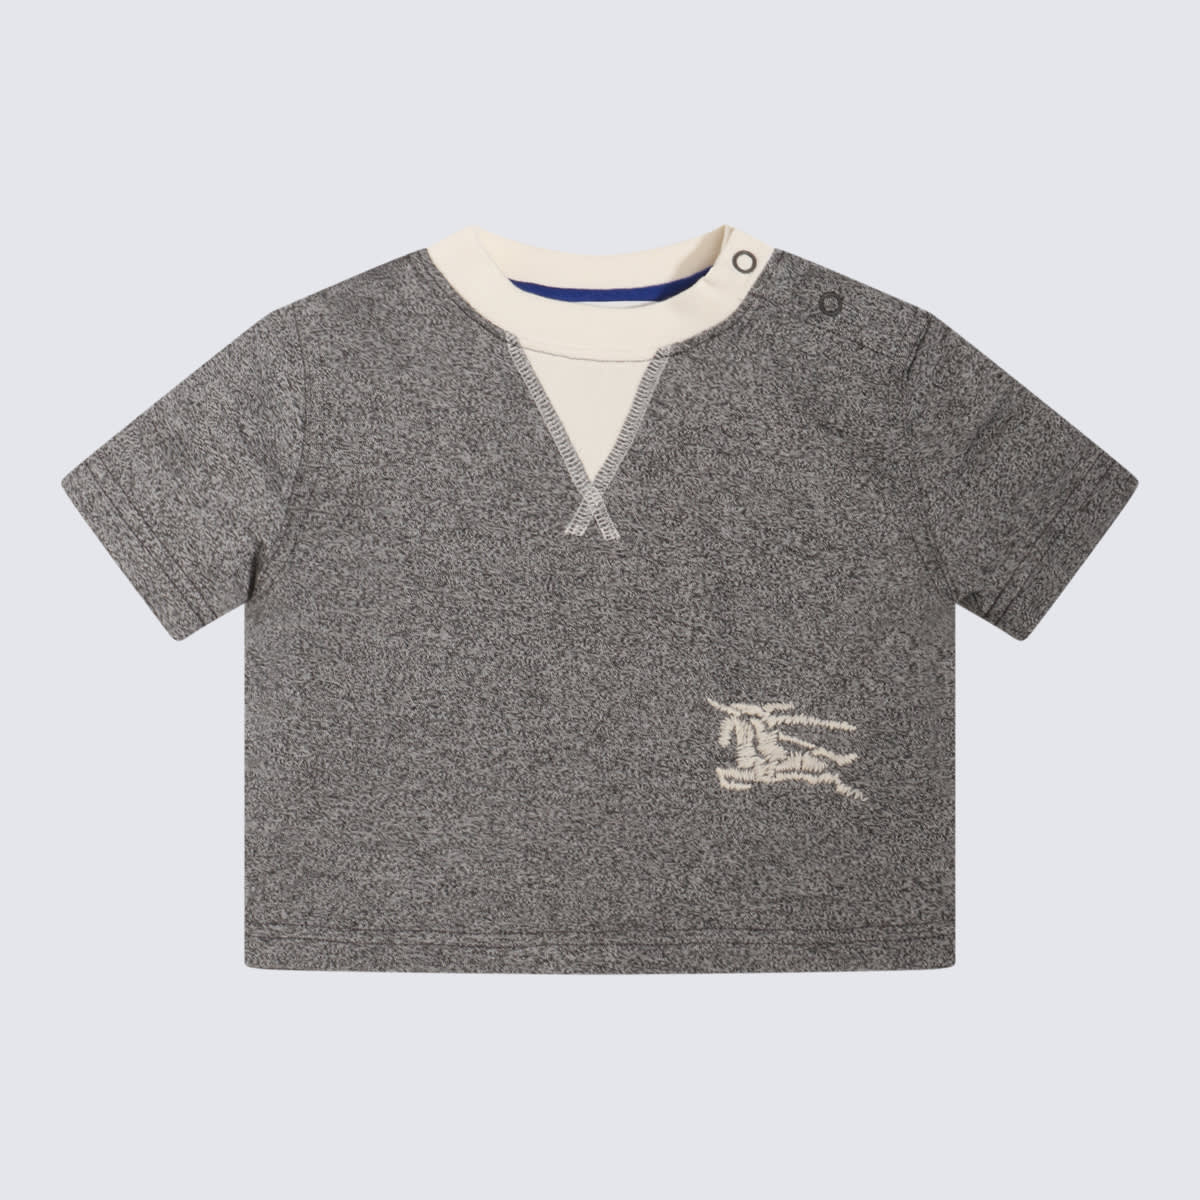 Burberry Babies' Grey And White Cotton T-shirt In Charcoal Grey Melang